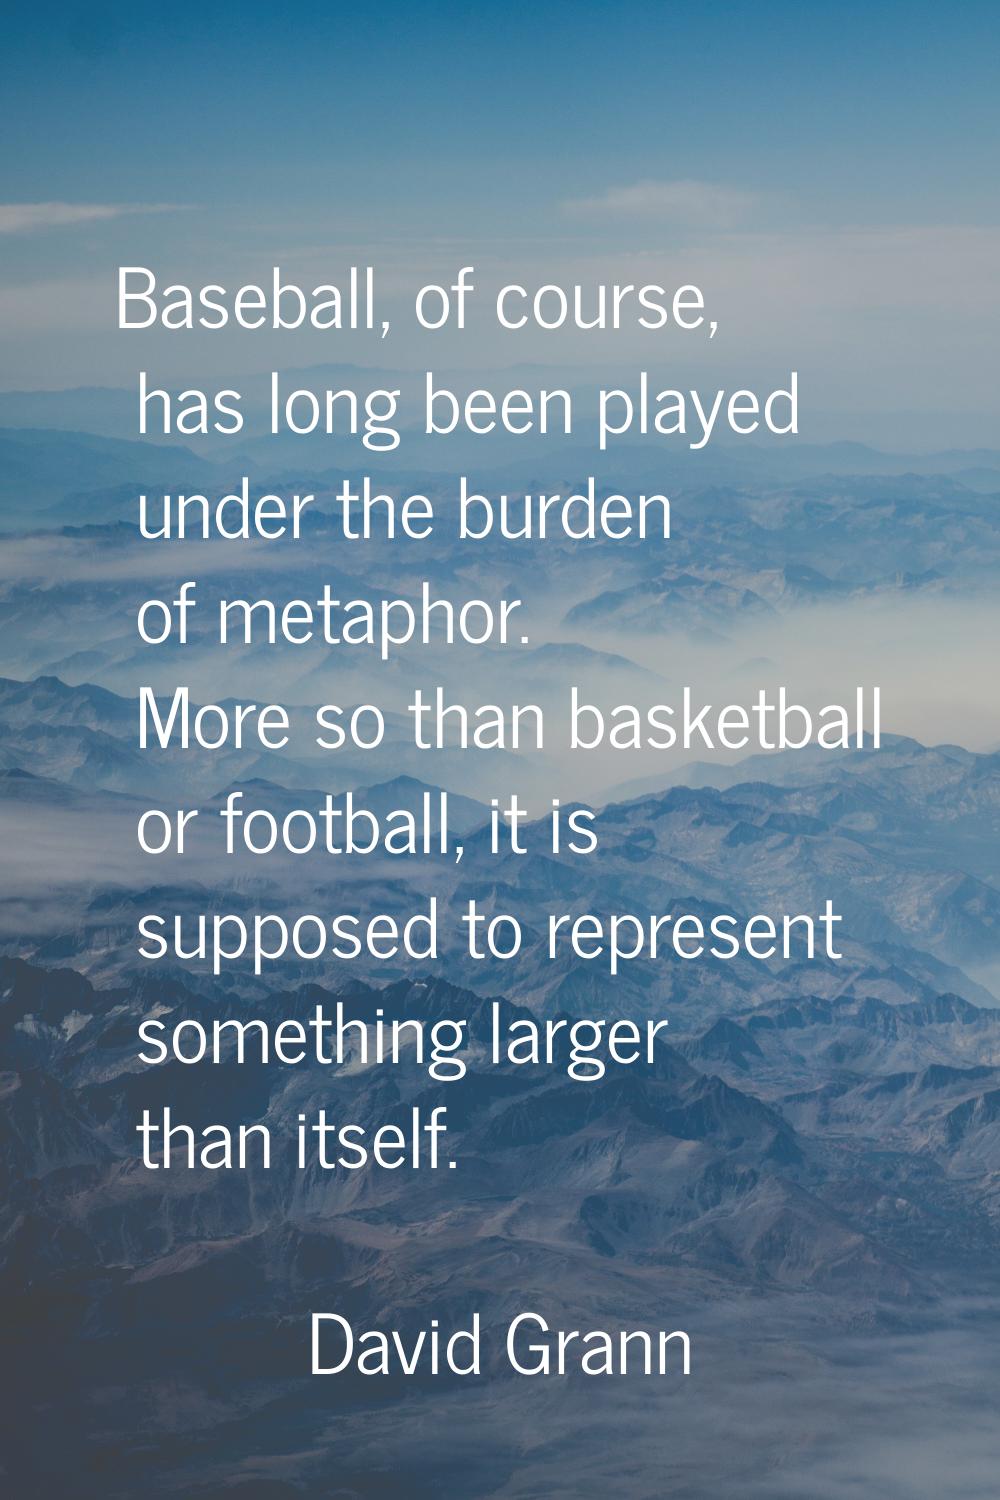 Baseball, of course, has long been played under the burden of metaphor. More so than basketball or 